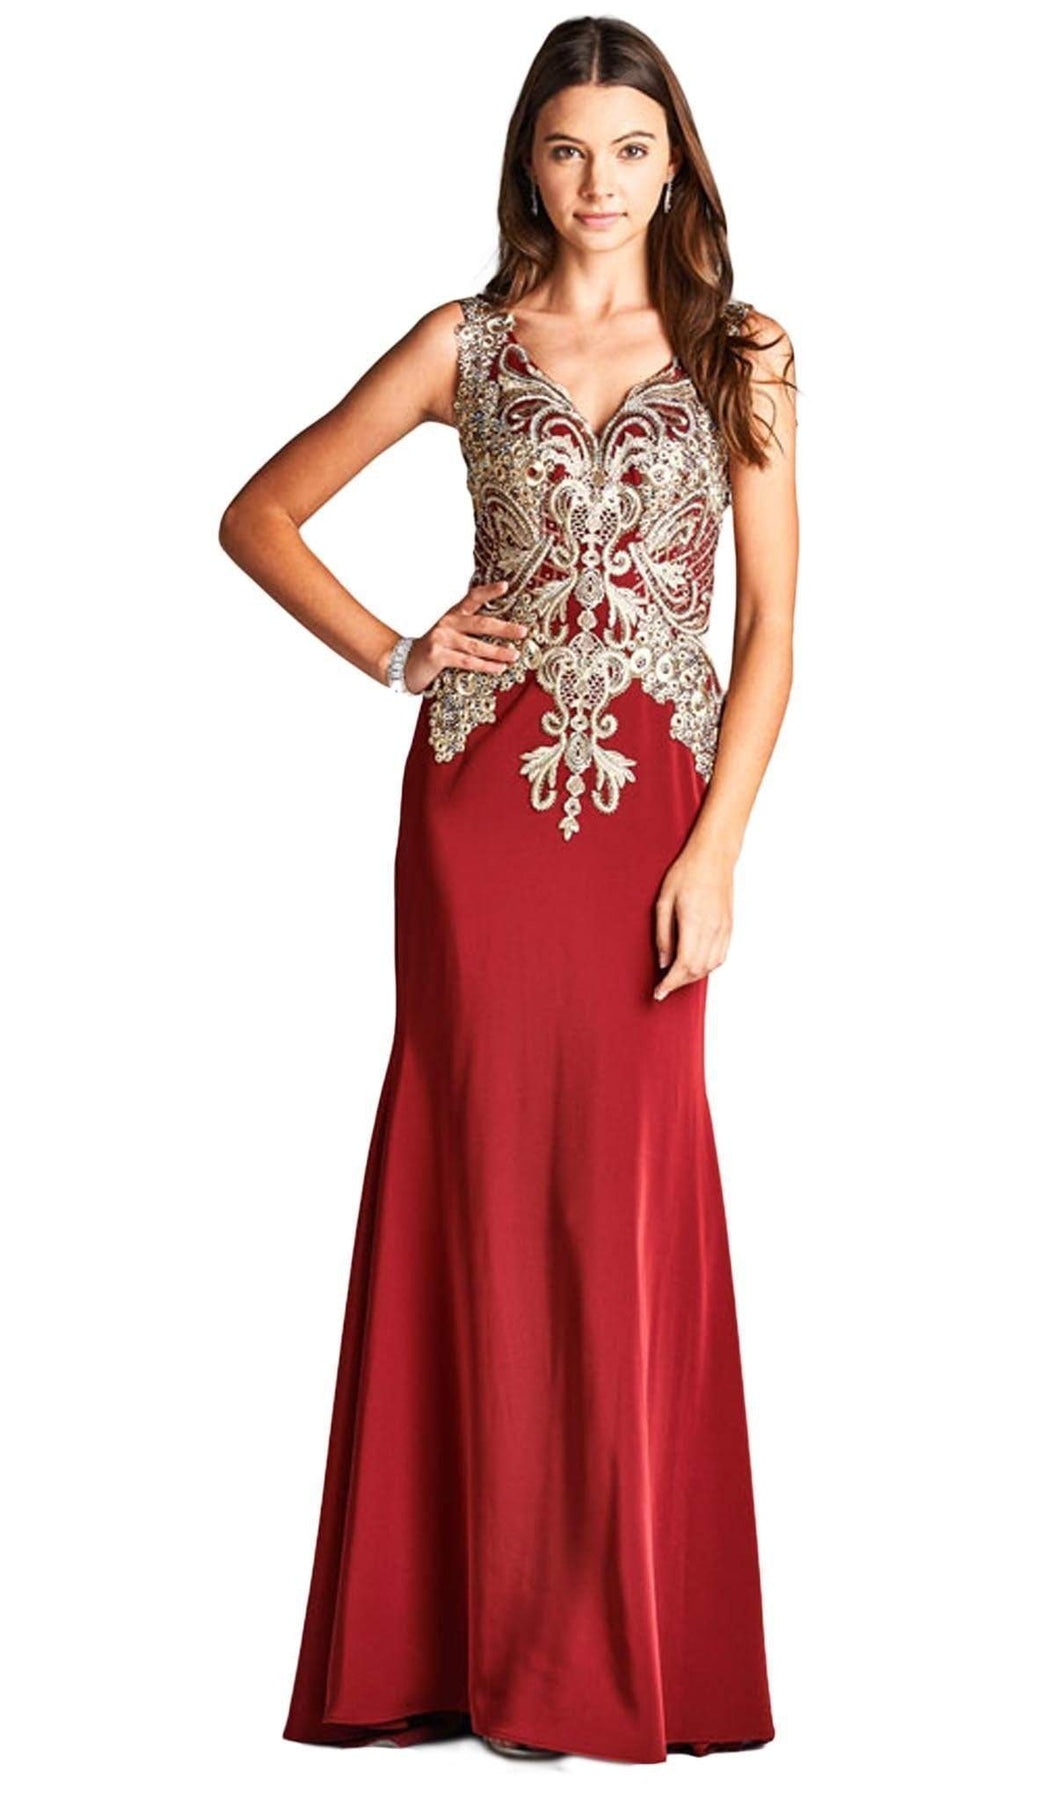 Aspeed Design - Sleeveless Embroidered Prom Dress L1695 In Red